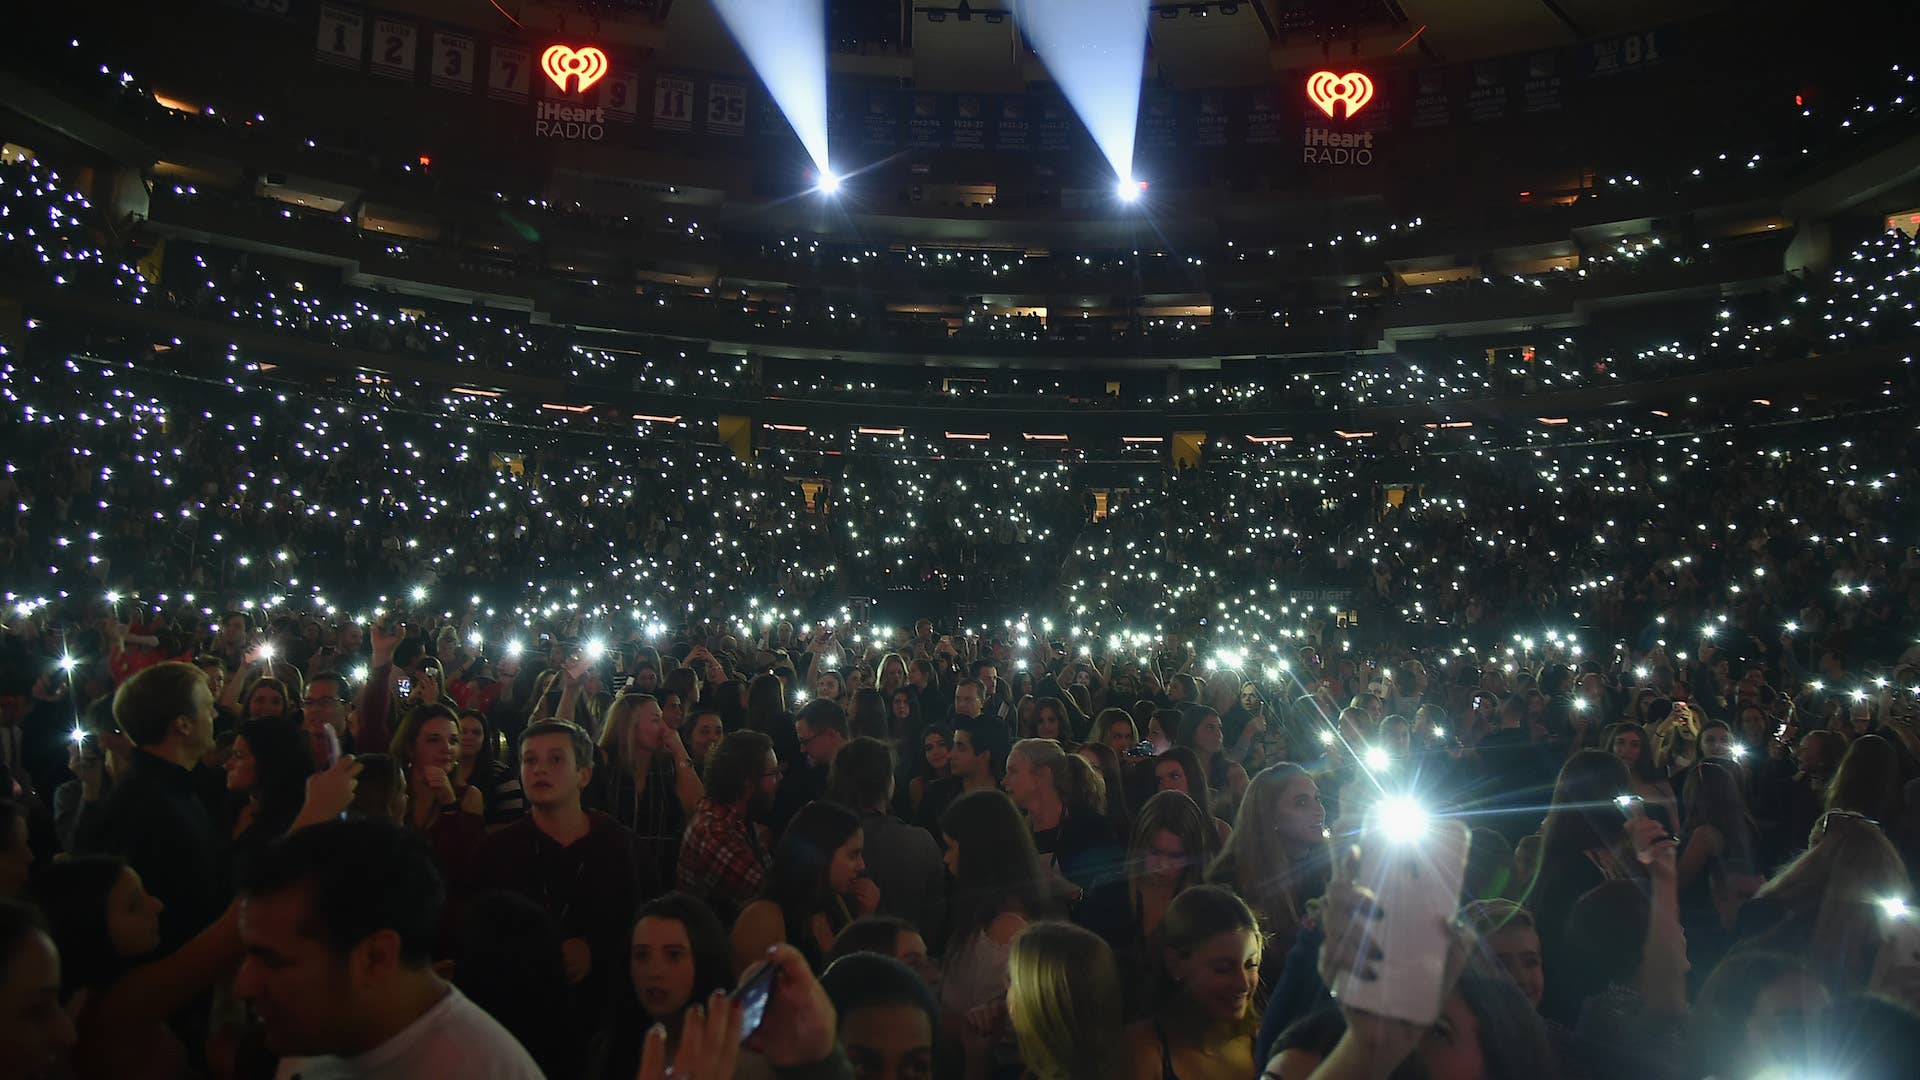 The crowd reacts during Z100's Jingle Ball 2016 at Madison Square Garden